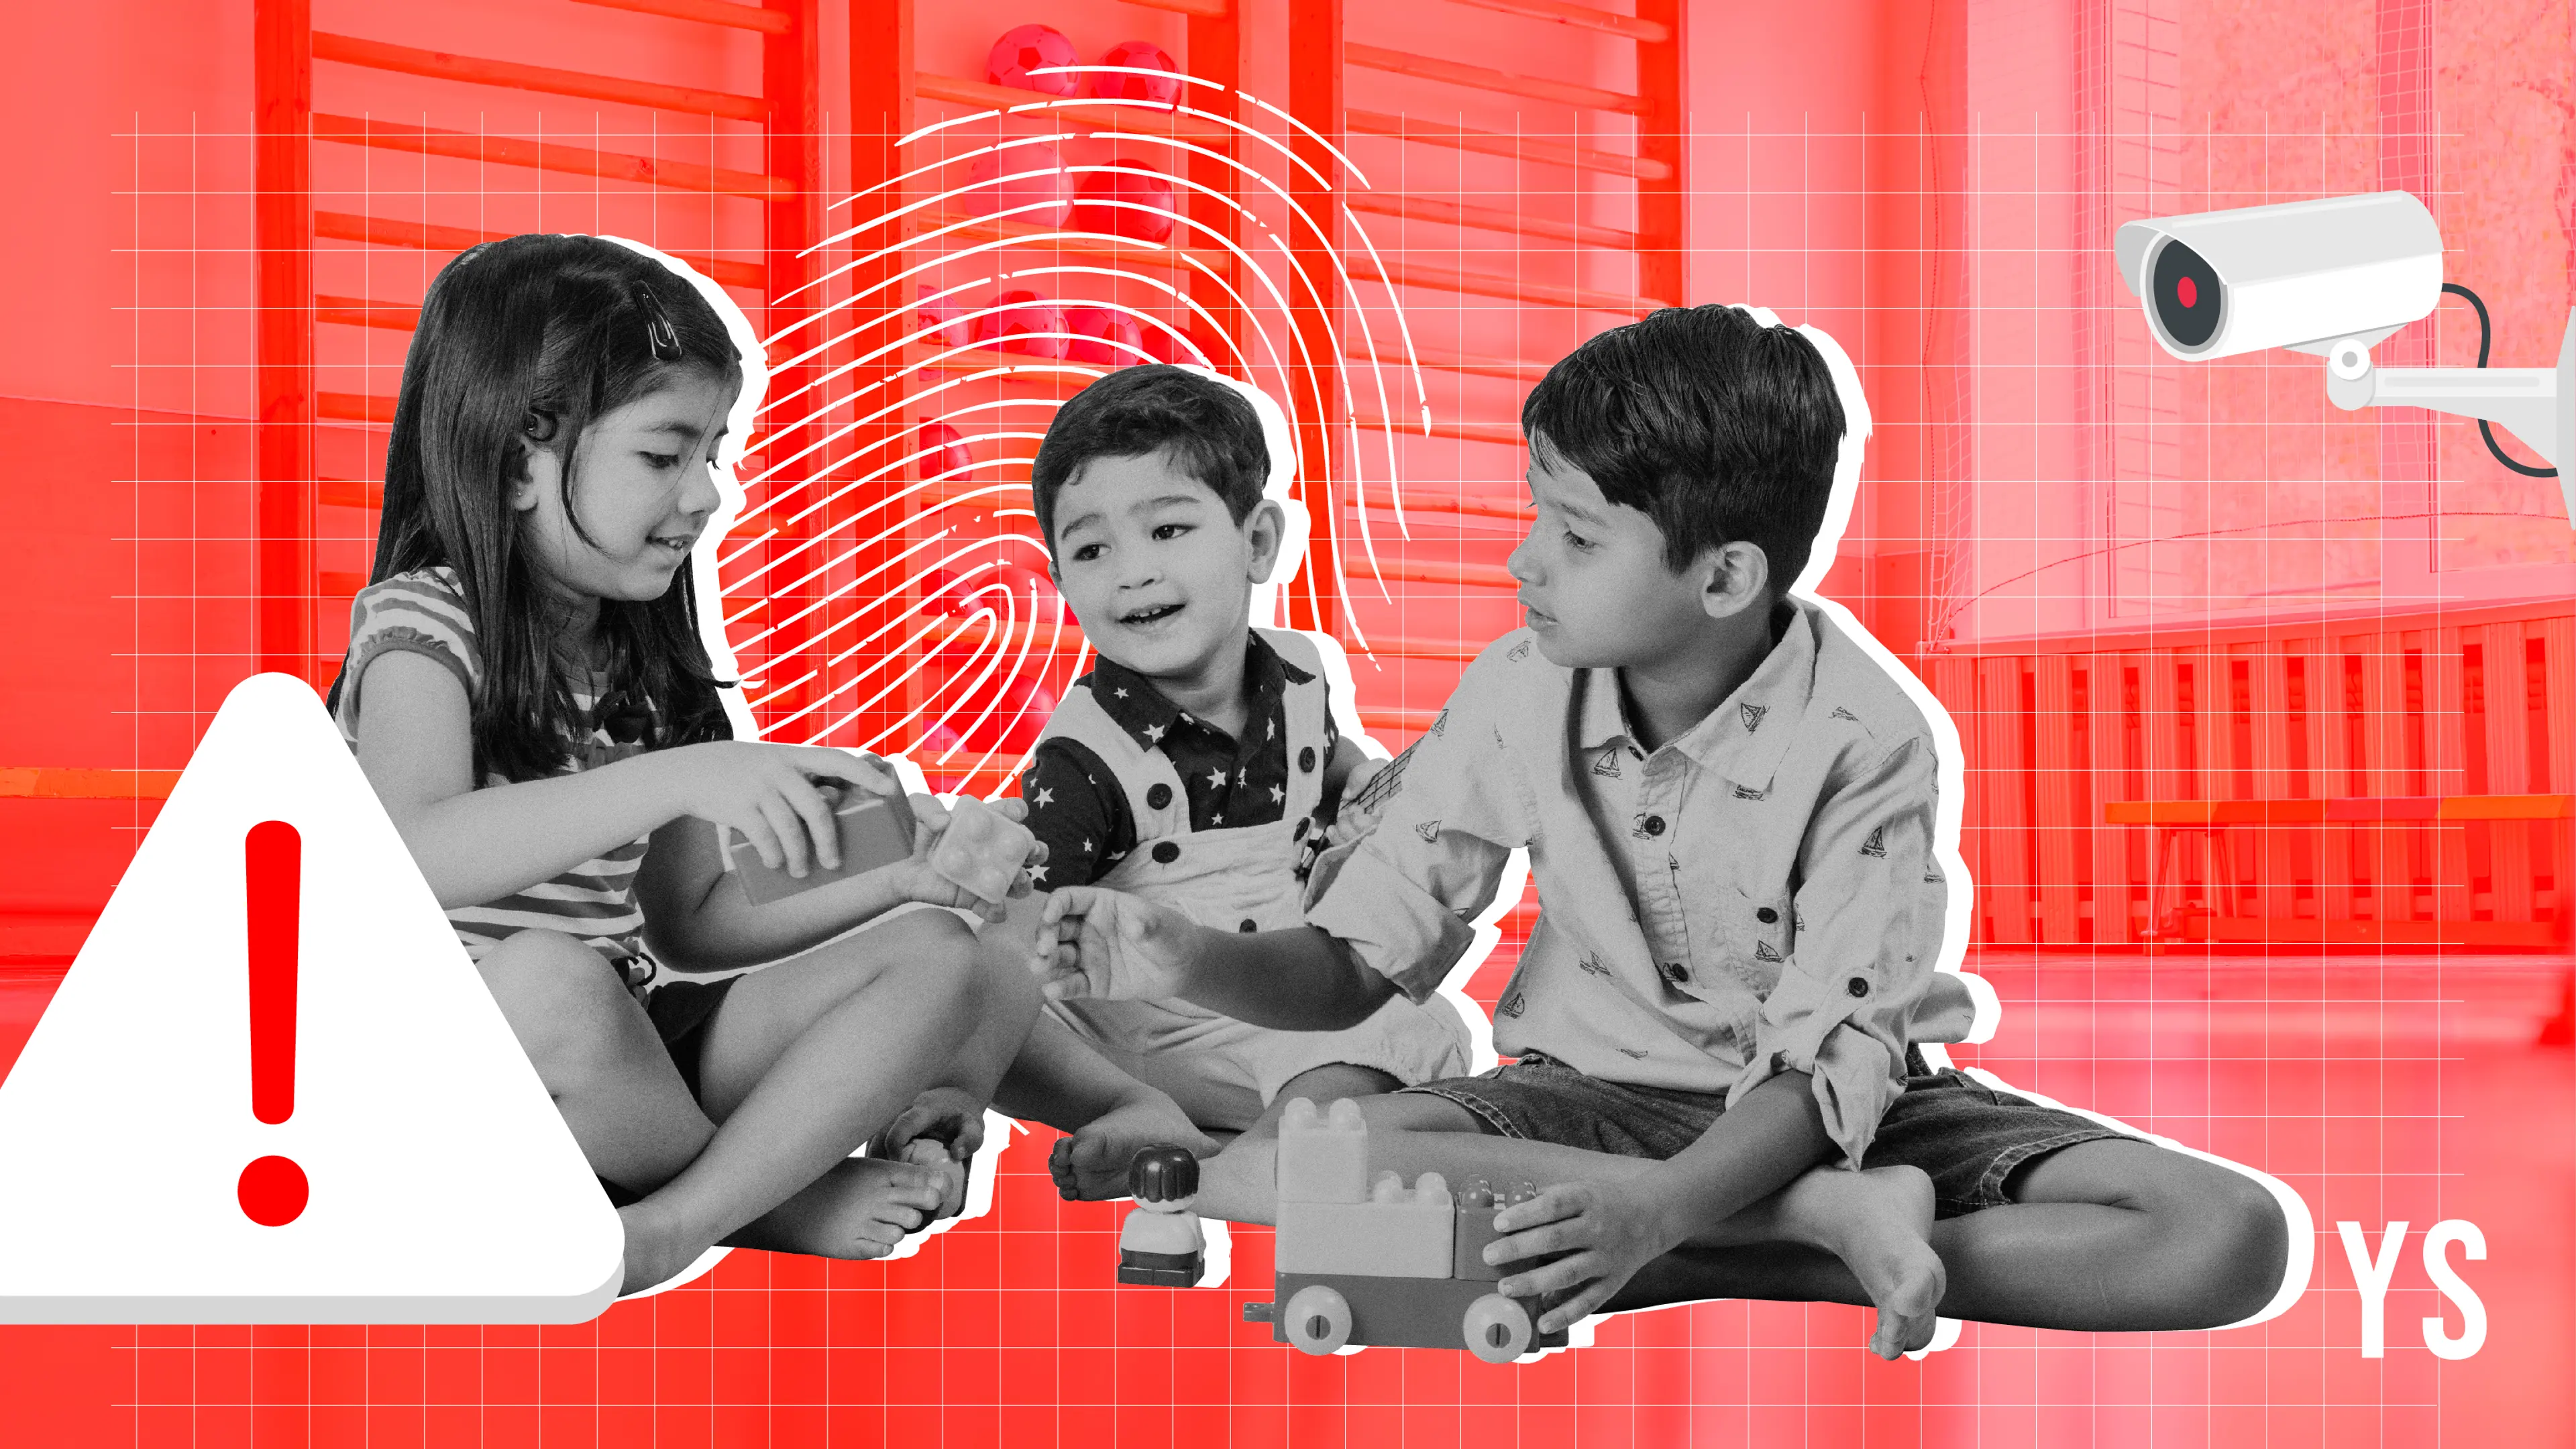 How technology can enhance safety in preschools